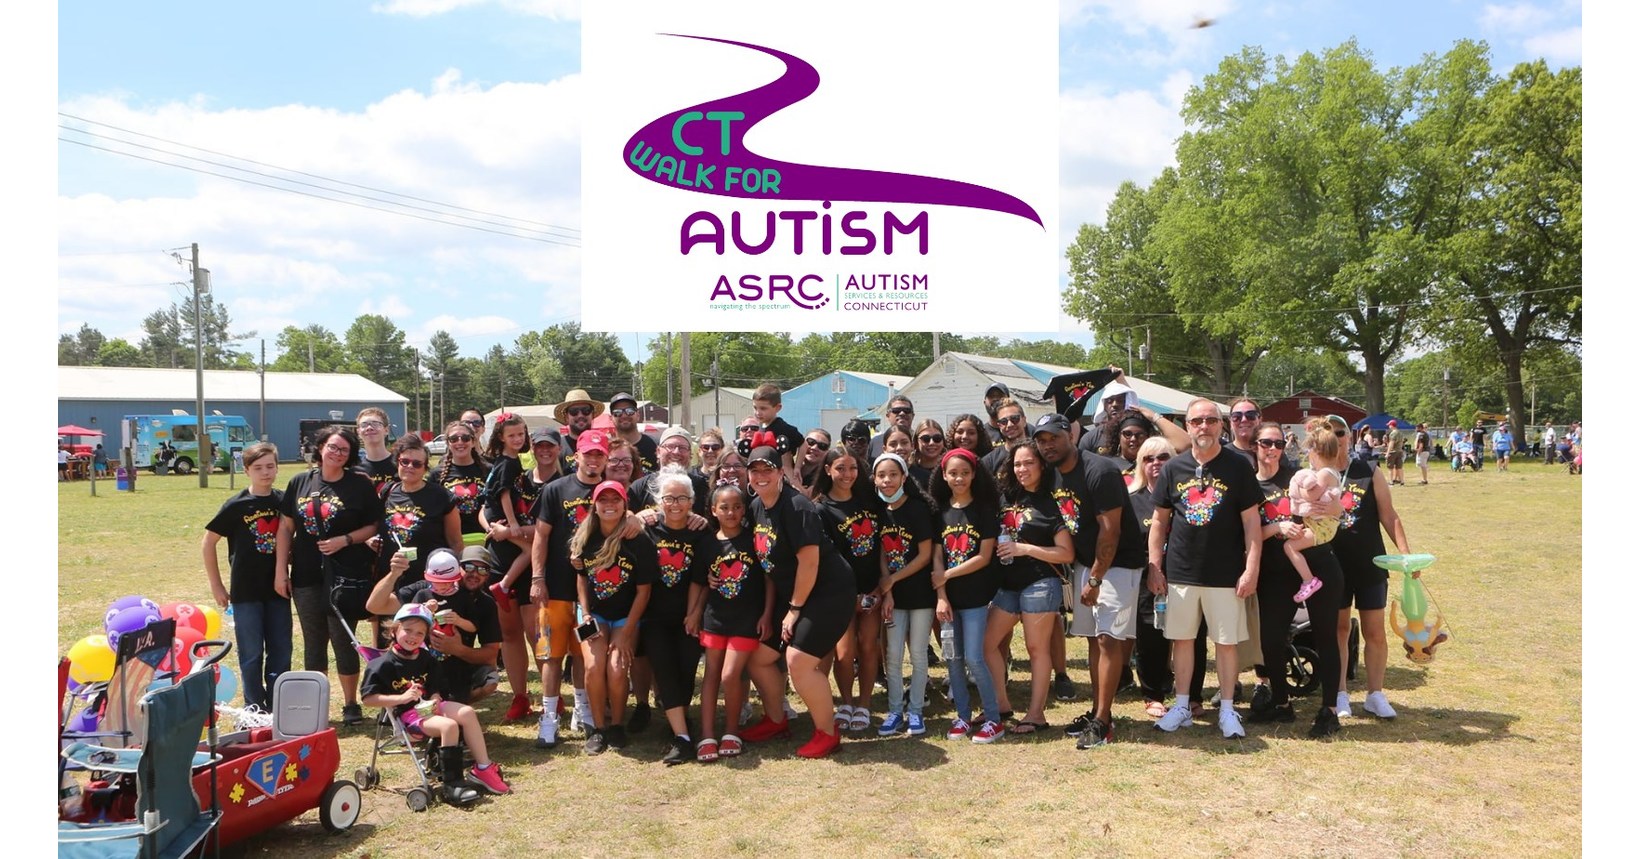 Autism Services and Resources Connecticut holding 25th Annual Walk for Autism